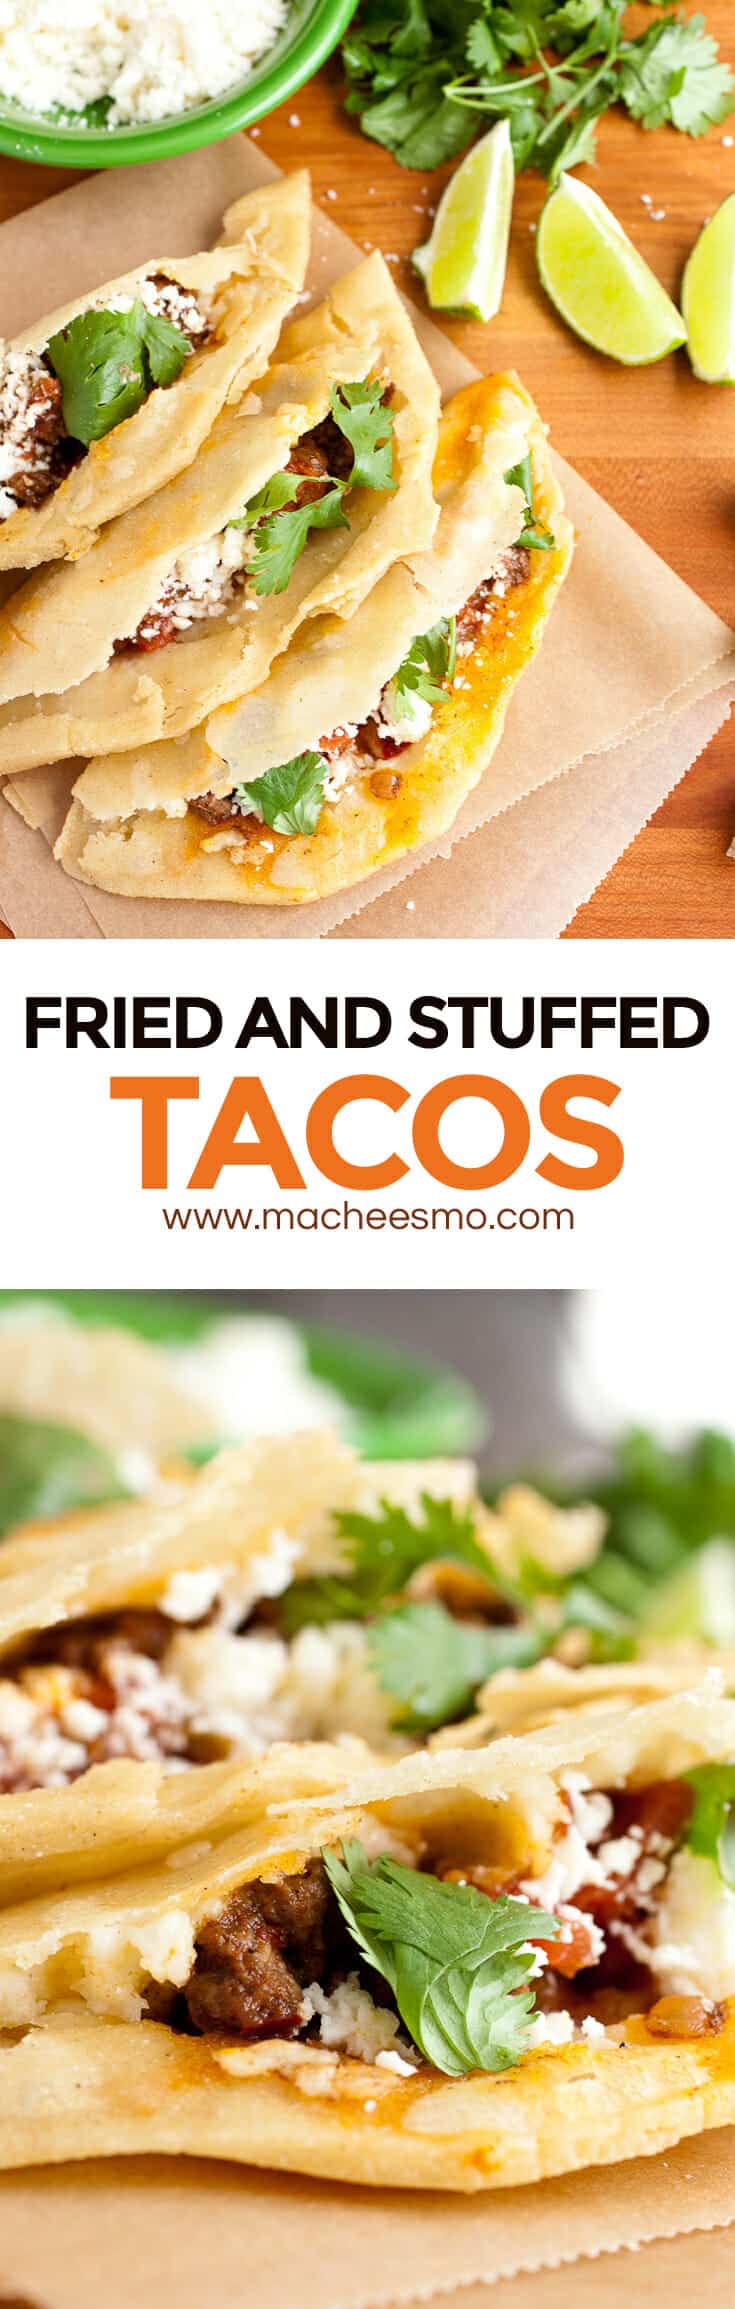 Fried and Stuffed Tacos: Inspired by the delicious Taco Especial at Los Tacos in NYC, this fried and stuffed taco is wonderfully crispy on the outside and stuffed with whatever toppings you can dream up! It's a little work to get it right, but totally worth it! | macheesmo.com